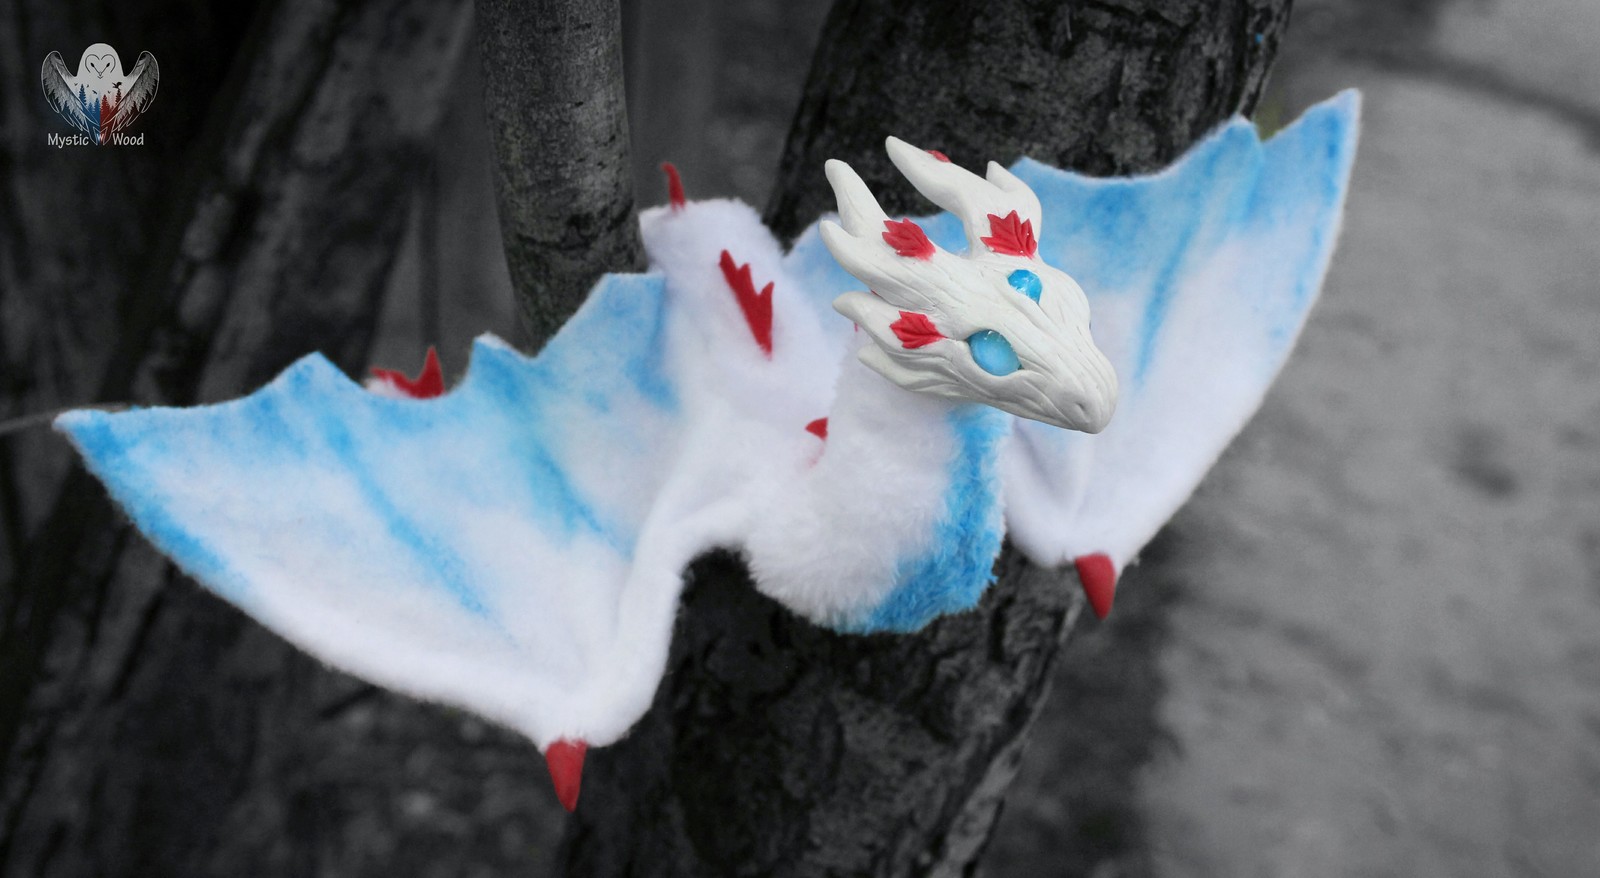 Northern Guardian of the Weirwood - My, The Dragon, Amphipter, Game of Thrones, Chardrevo, Handmade, Needlework without process, Polymer clay, Longpost